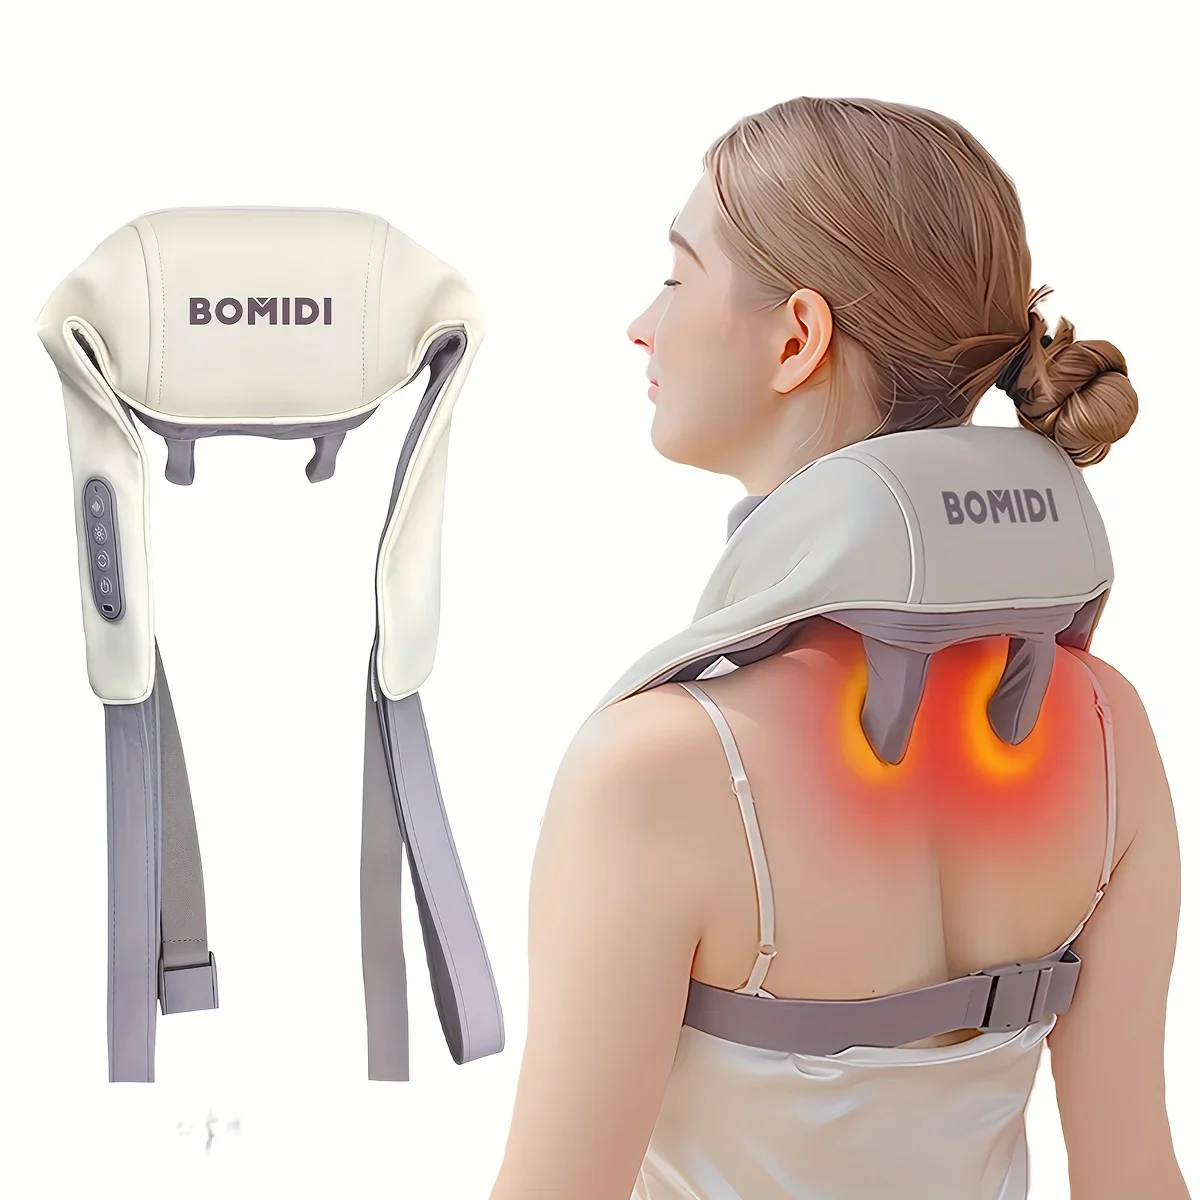 

Deep Tissue Shiatsu Neck and Shoulder Massager with Heat for Effective Pain Relief - Innovative Kneading Massage for Neck, Back,